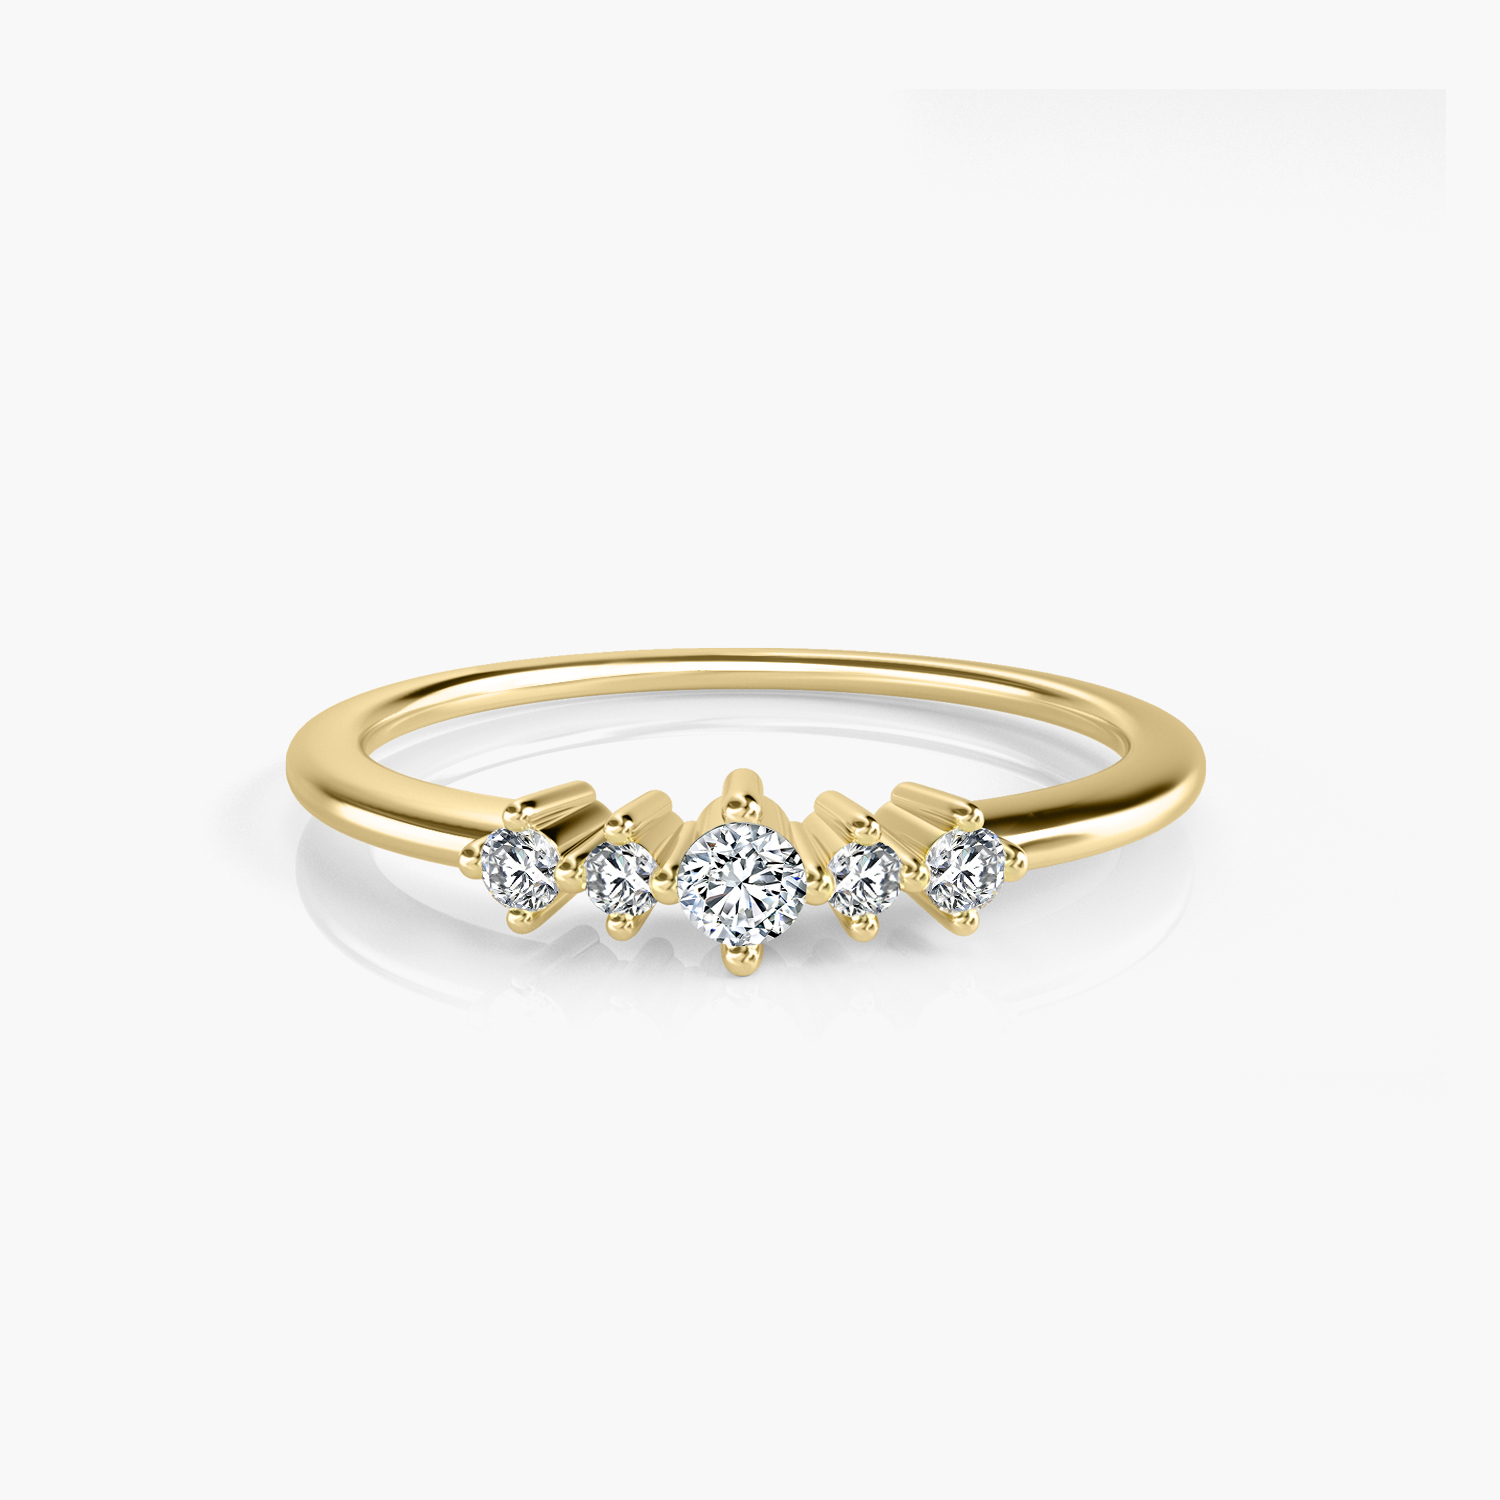 Olive Effortless Beauty Gold Plated Diamond Ring